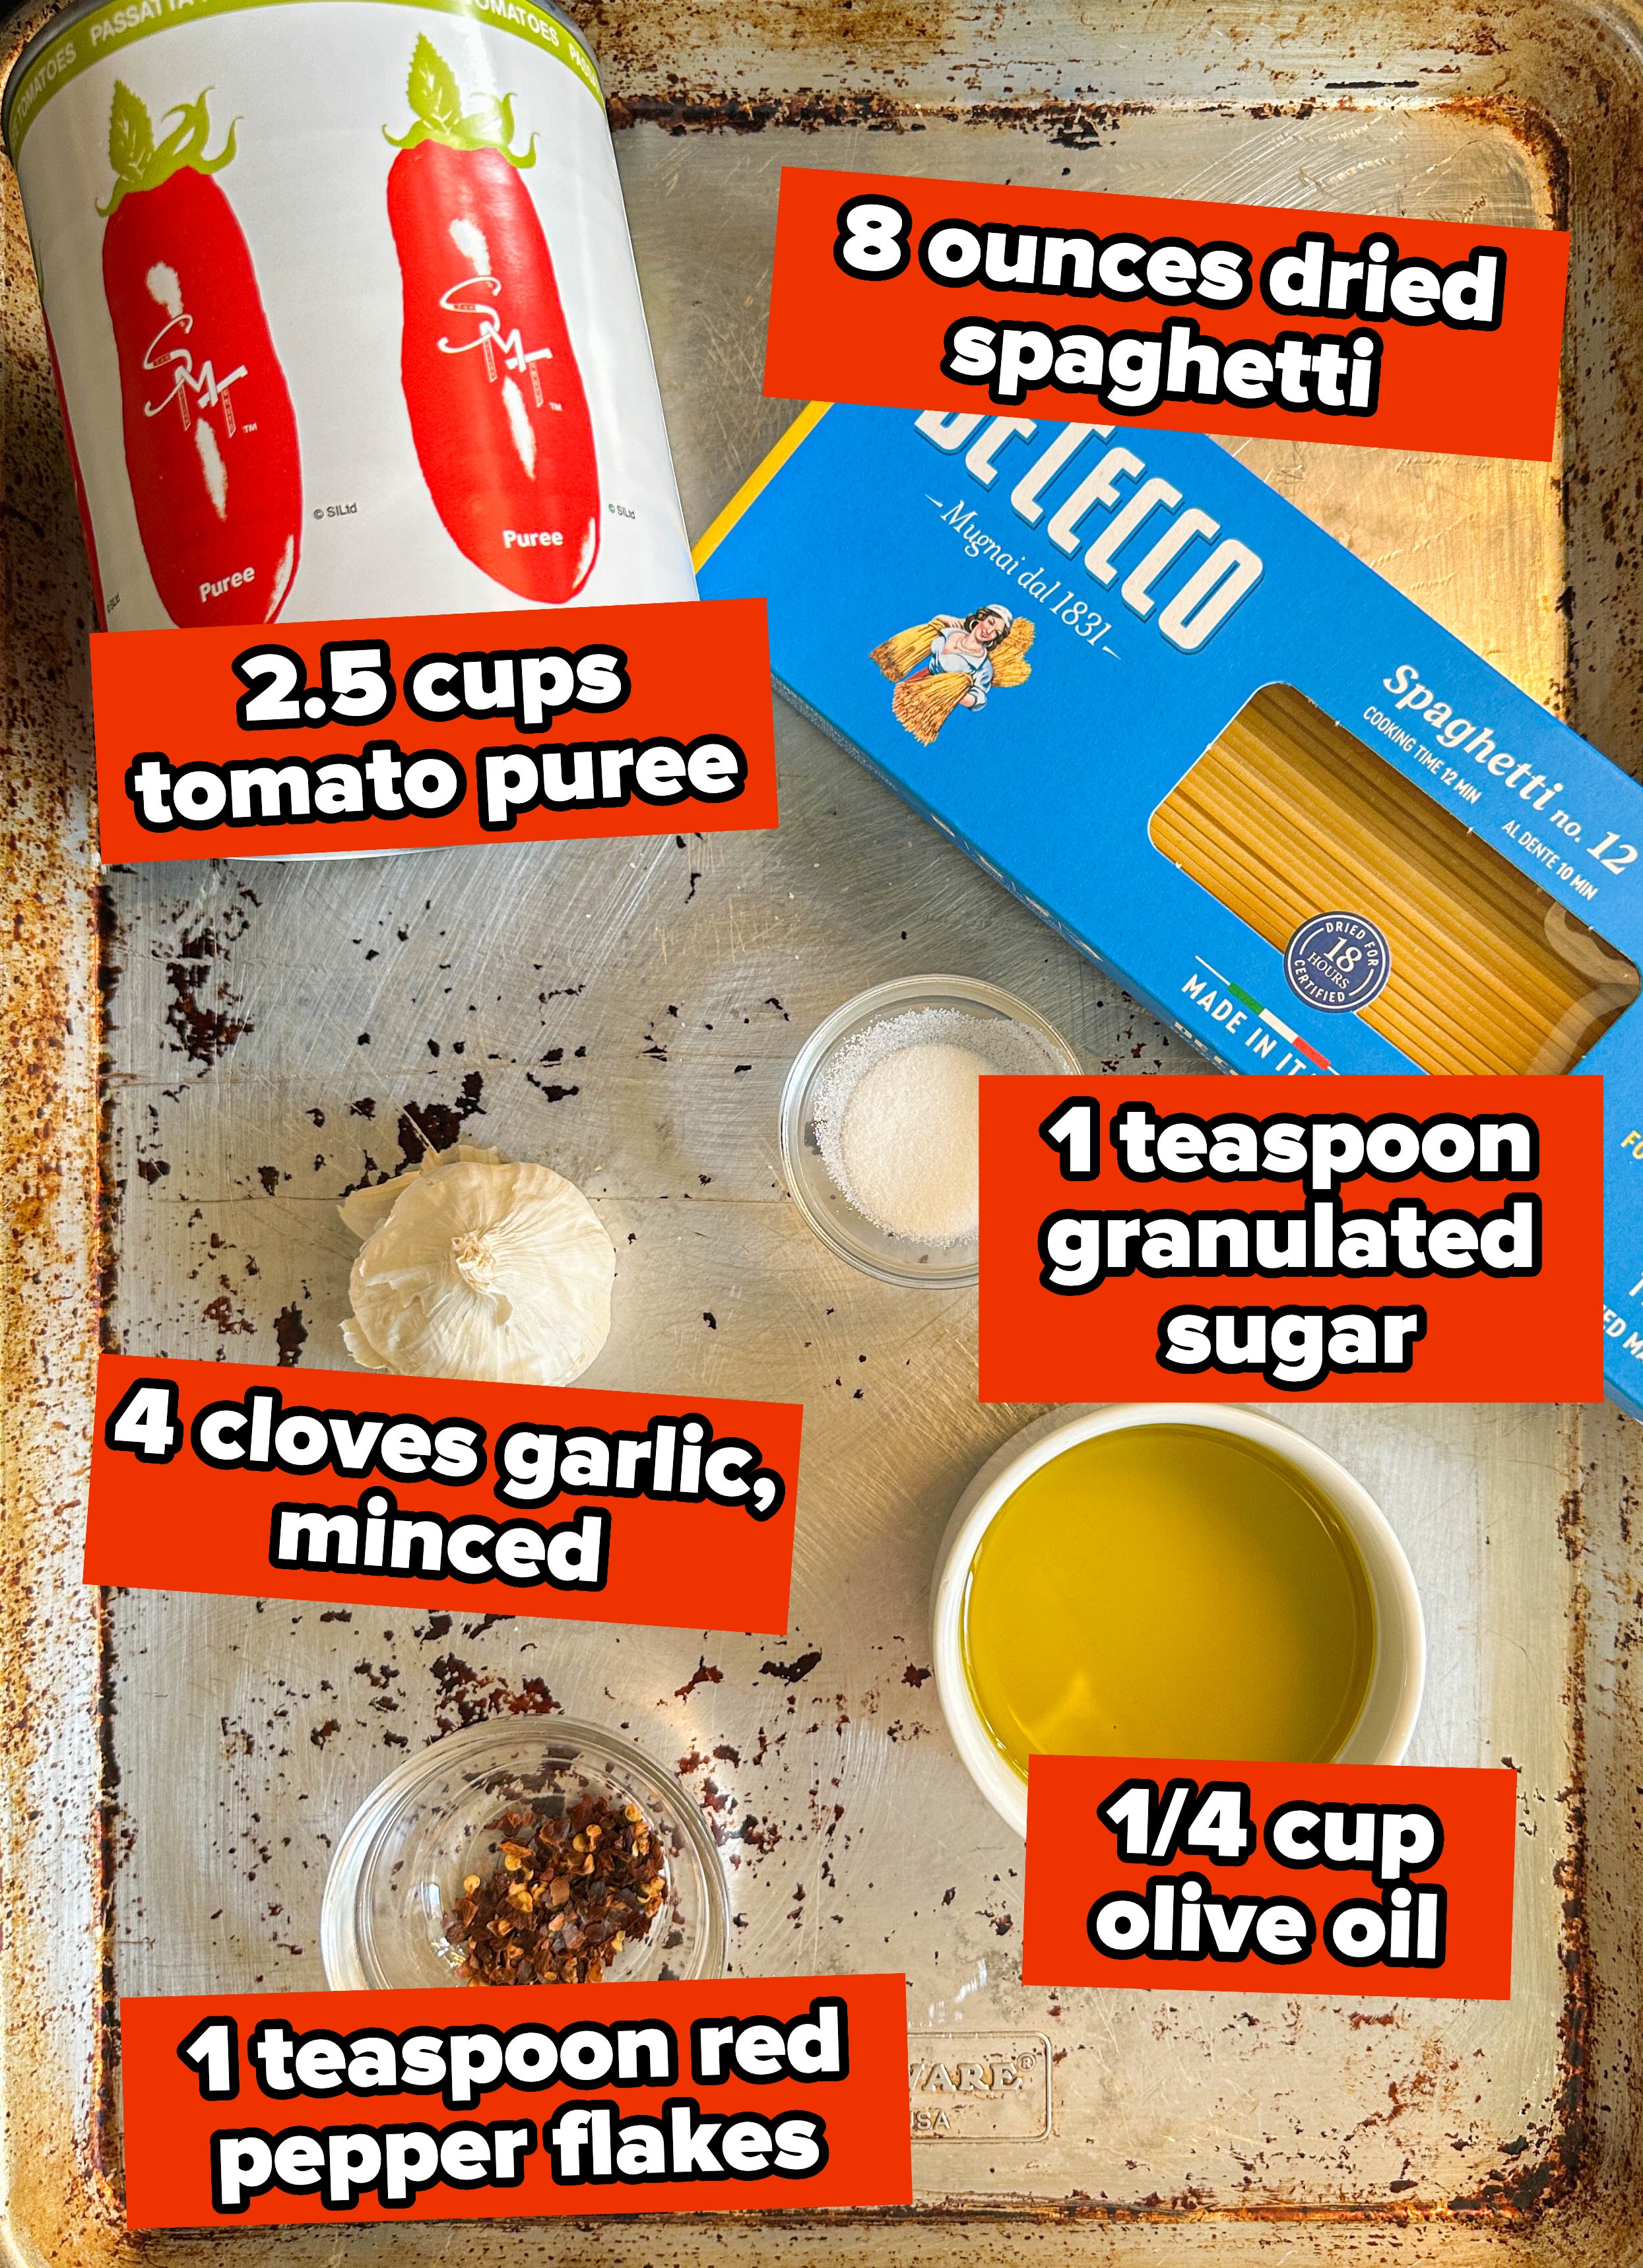 Ingredients for a recipe laid out on a baking sheet including canned tomatoes, pasta, garlic, oil, sugar, and pepper flakes